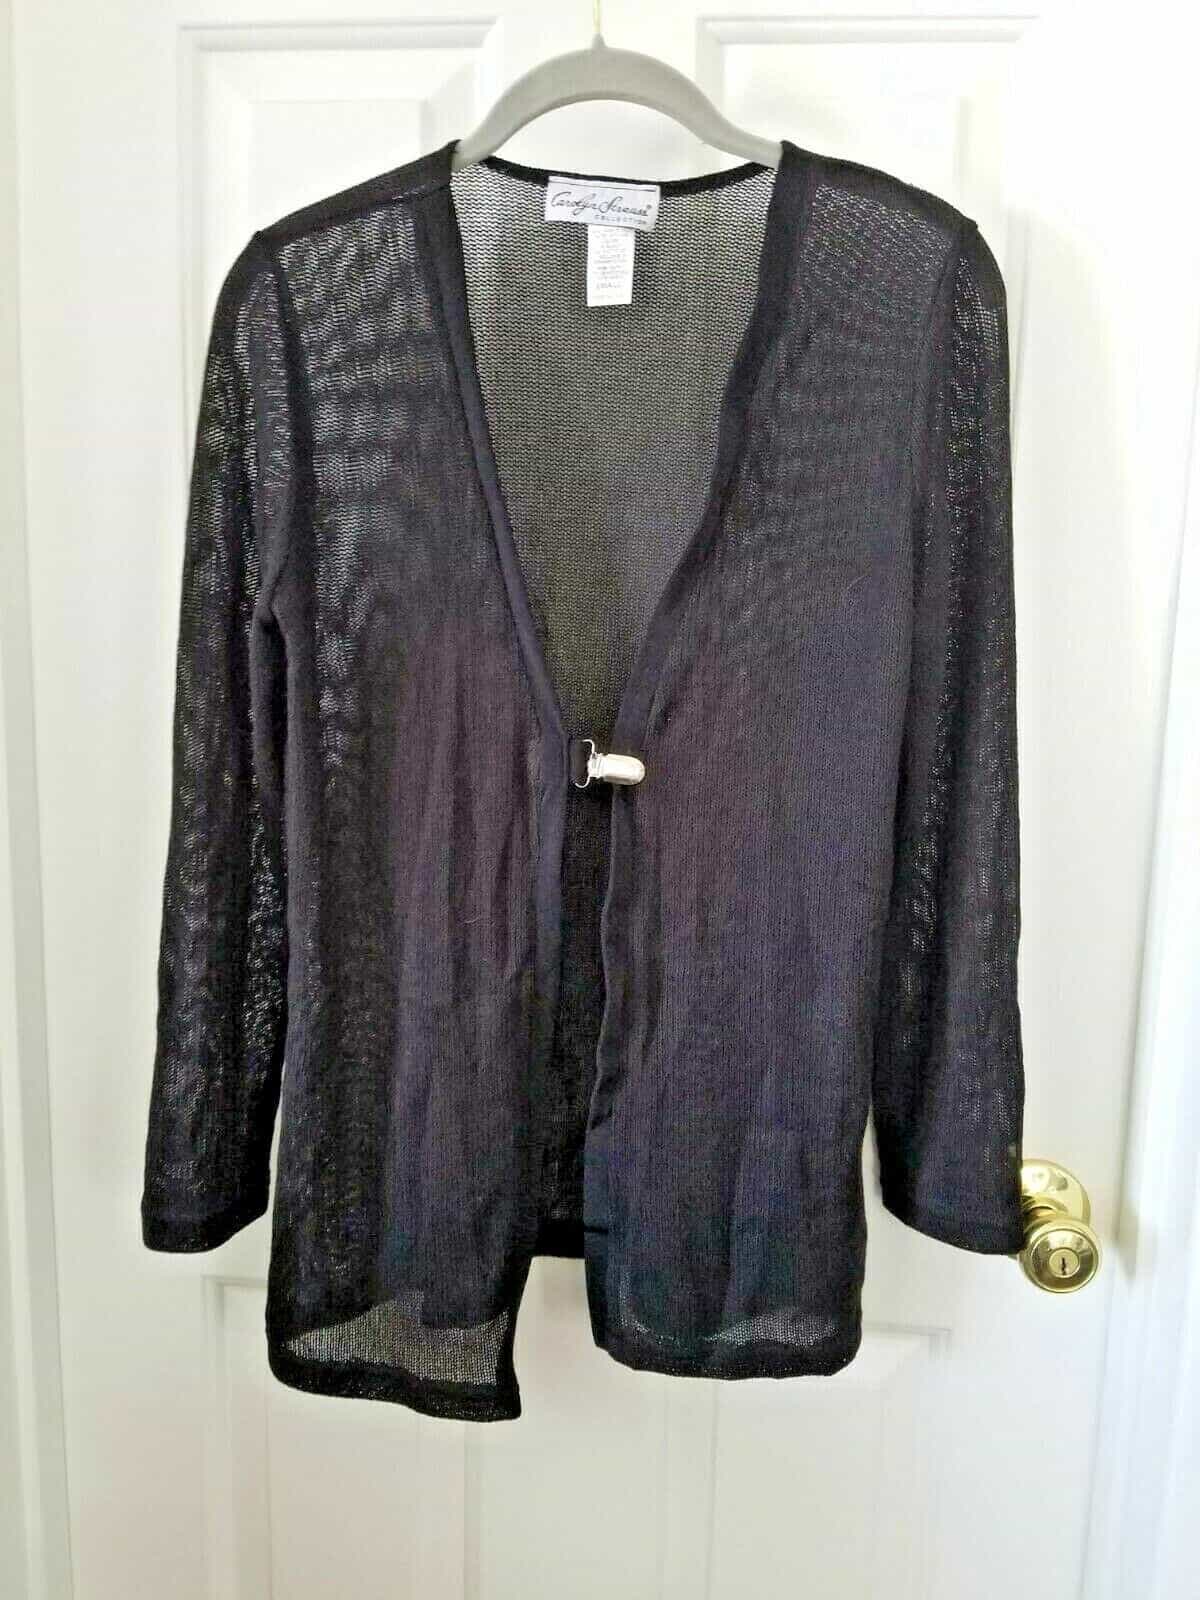 Carolyn Strauss No Button Sweater Black Size Small